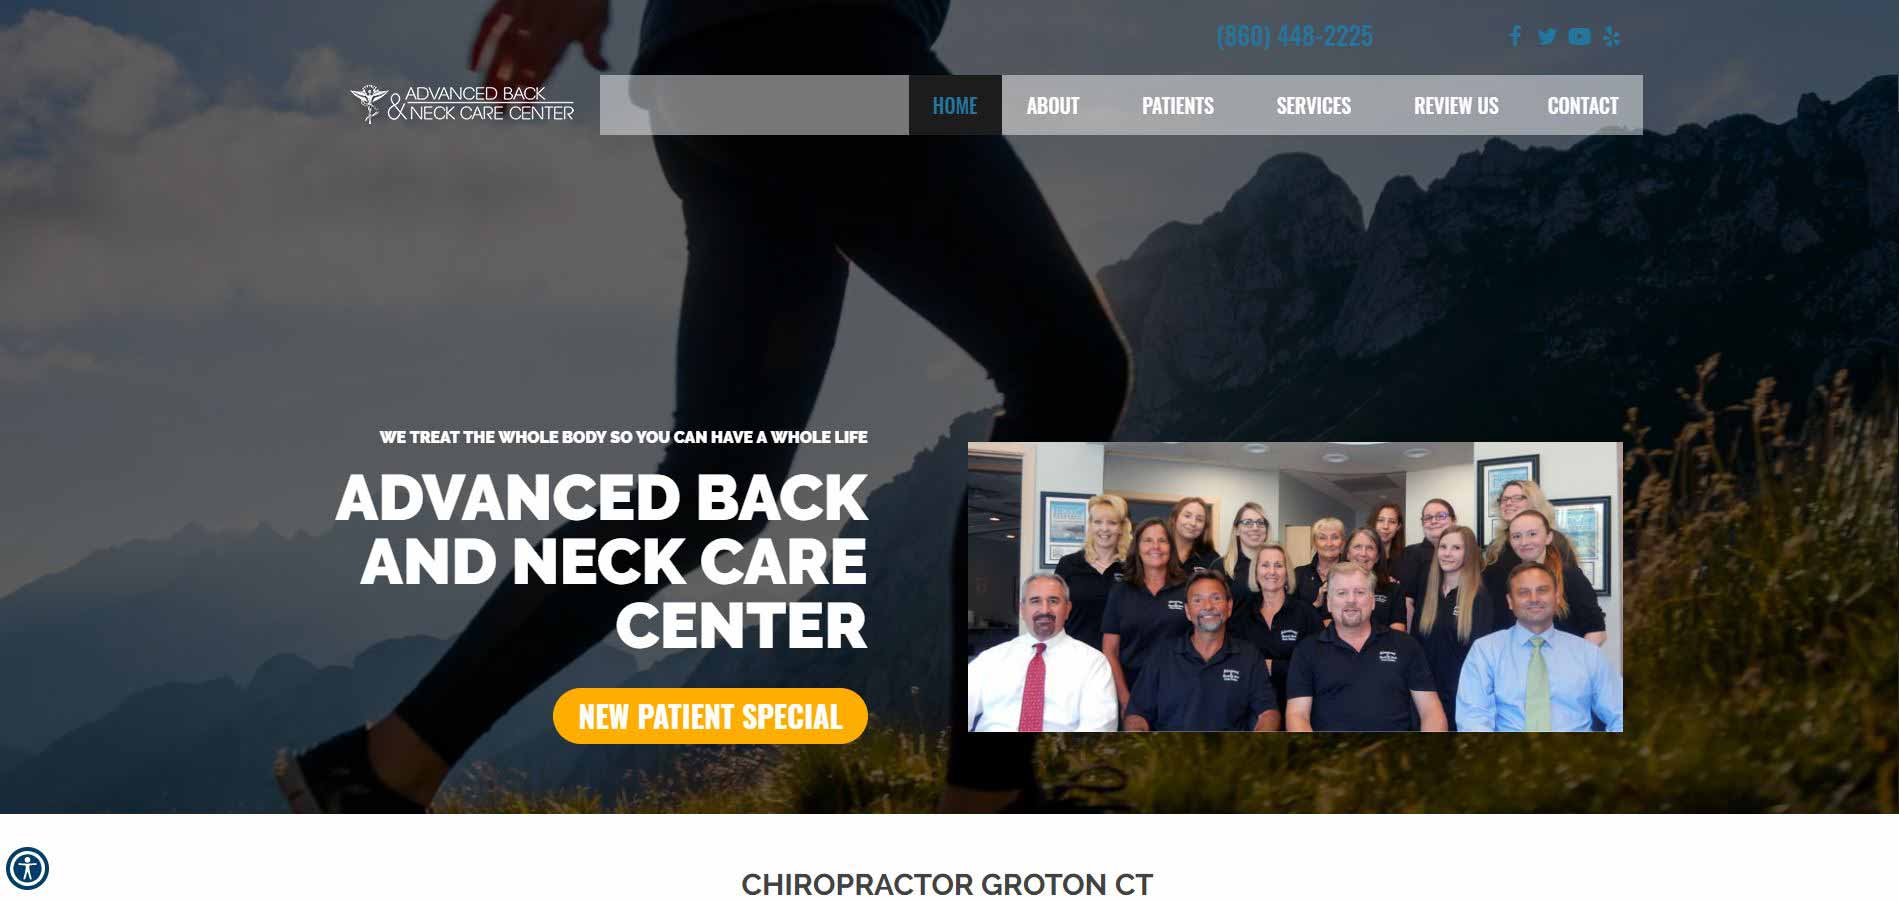 Chiropractor Groton CT Advanced Back and Neck Care Center